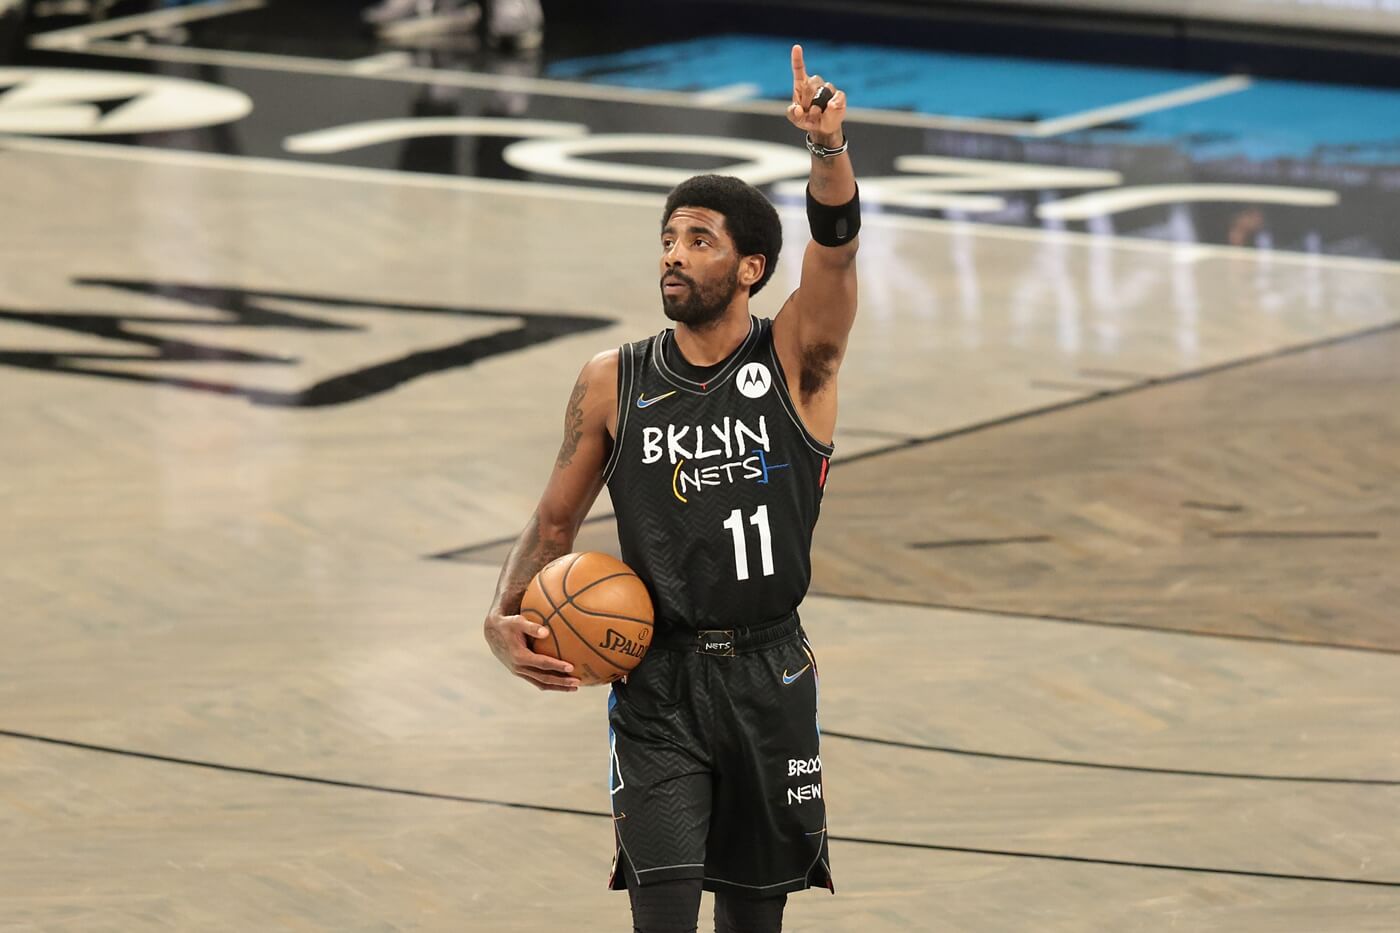 Apr 5, 2021; Brooklyn, New York, USA; Brooklyn Nets guard Kyrie Irving (11) gestures to fans before a game against the New York Knicks at Barclays Center. Mandatory Credit: Vincent Carchietta-USA TODAY Sports